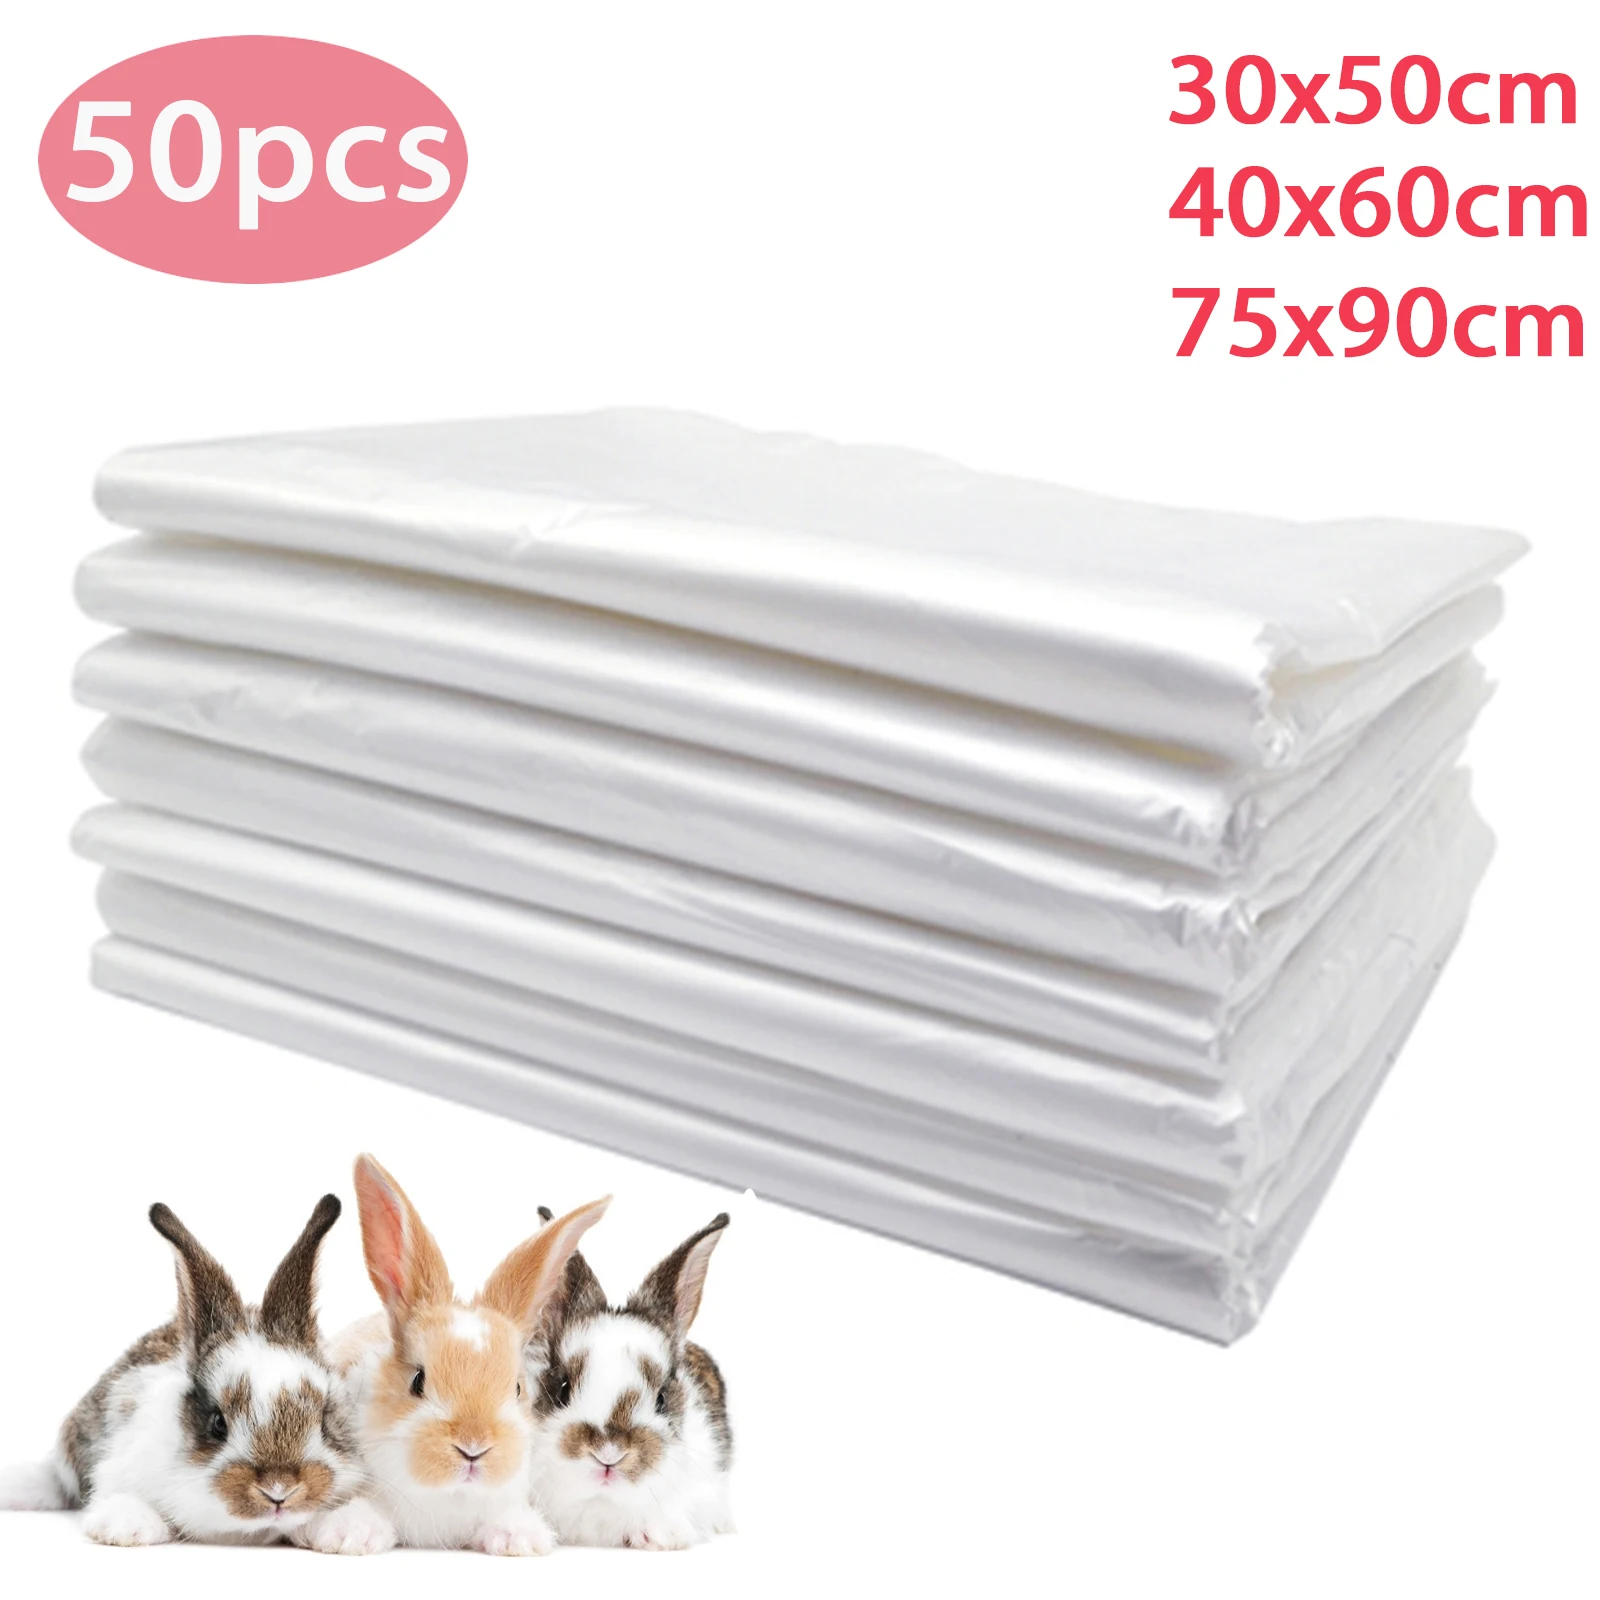 50Pcs Disposable Rabbit Cage Liner Plastic Bunny Cage Mat Cleaning Pad Replacement Diaper Universal Toilet Film For Small Animal